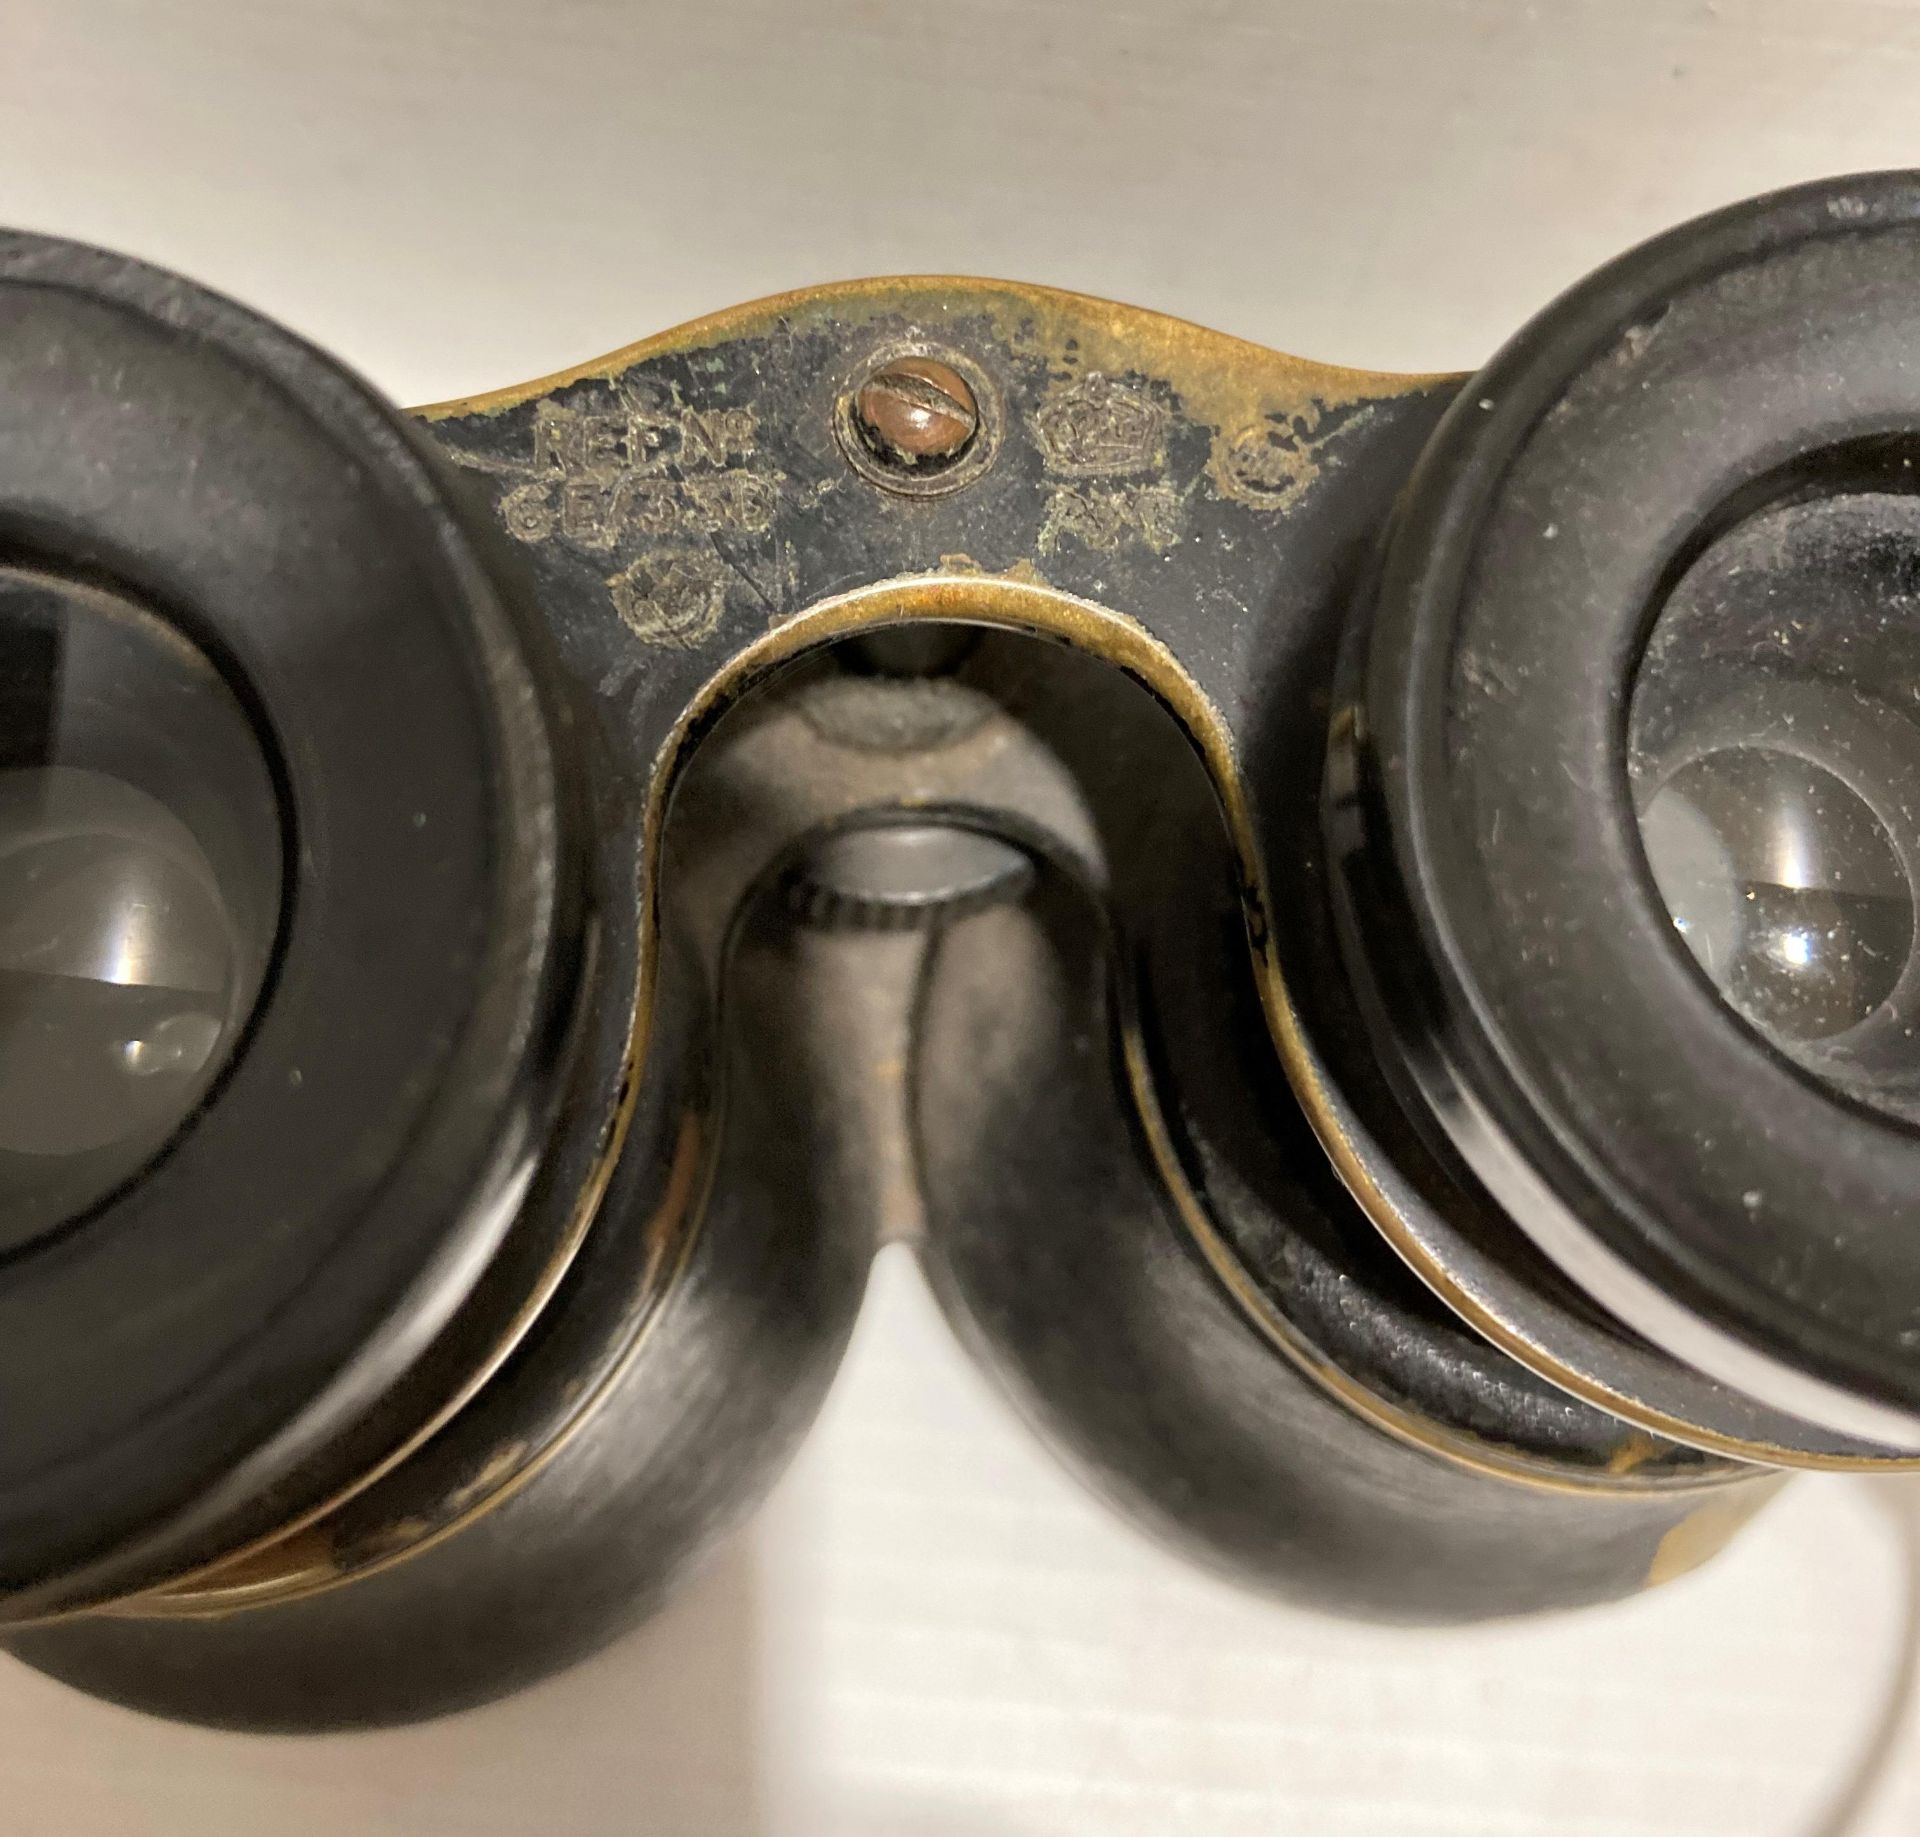 Pair of brass and black coated airborne vintage binoculars with stamps reg no: 6E/336 crown AM - Image 3 of 3